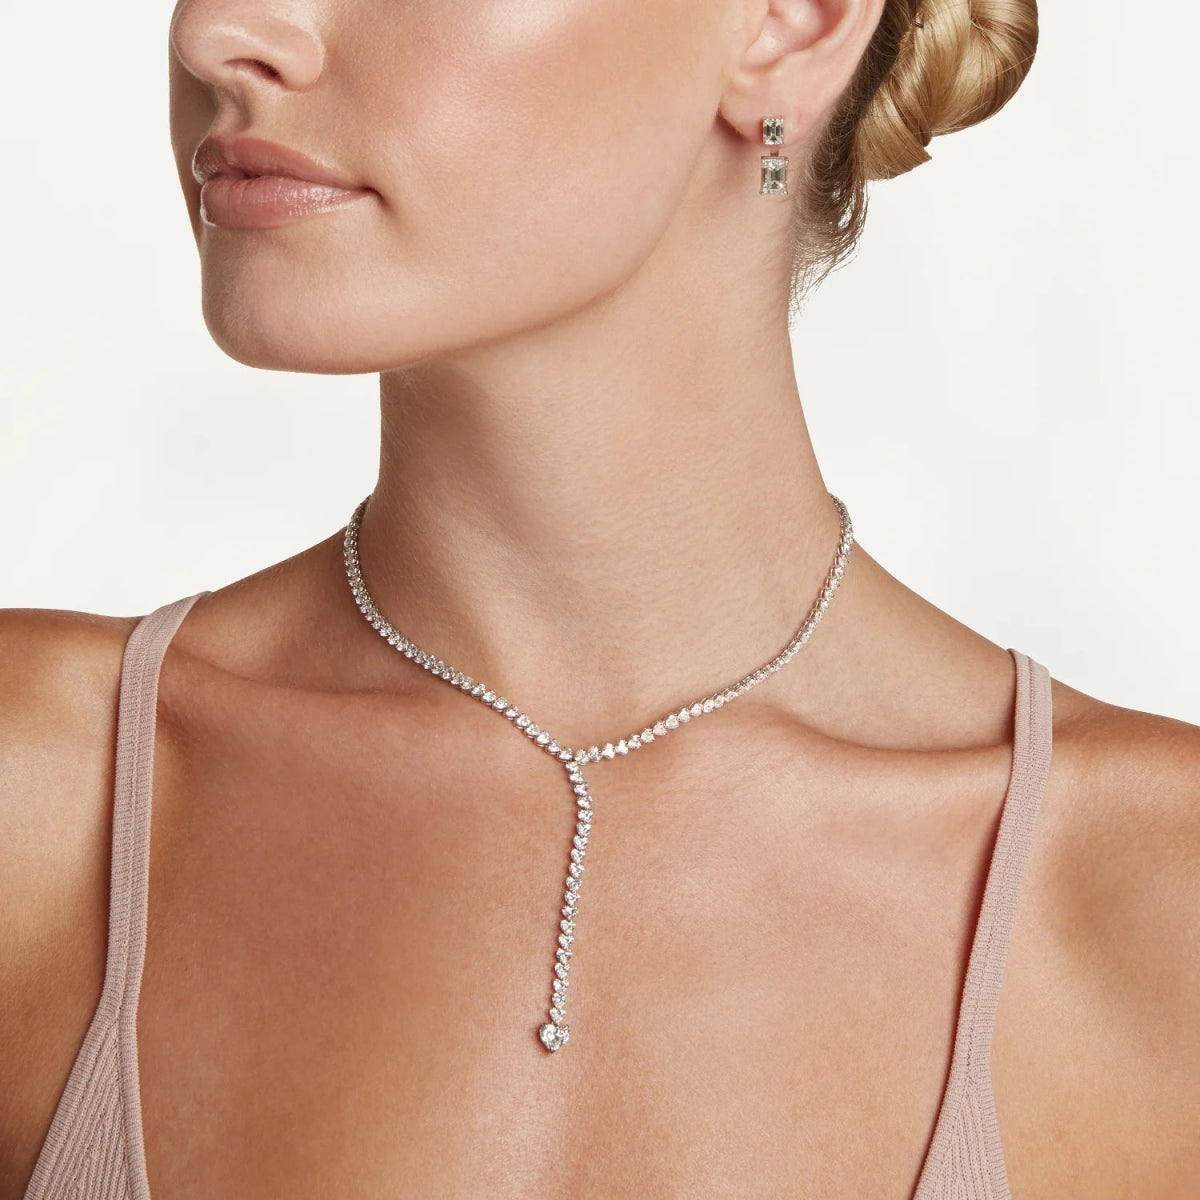 Blakonik | Radiant Love 5A CZ Heart-Shaped Tennis Chain Y Lariat Necklace in Rhodium and 18K Gold Plated -